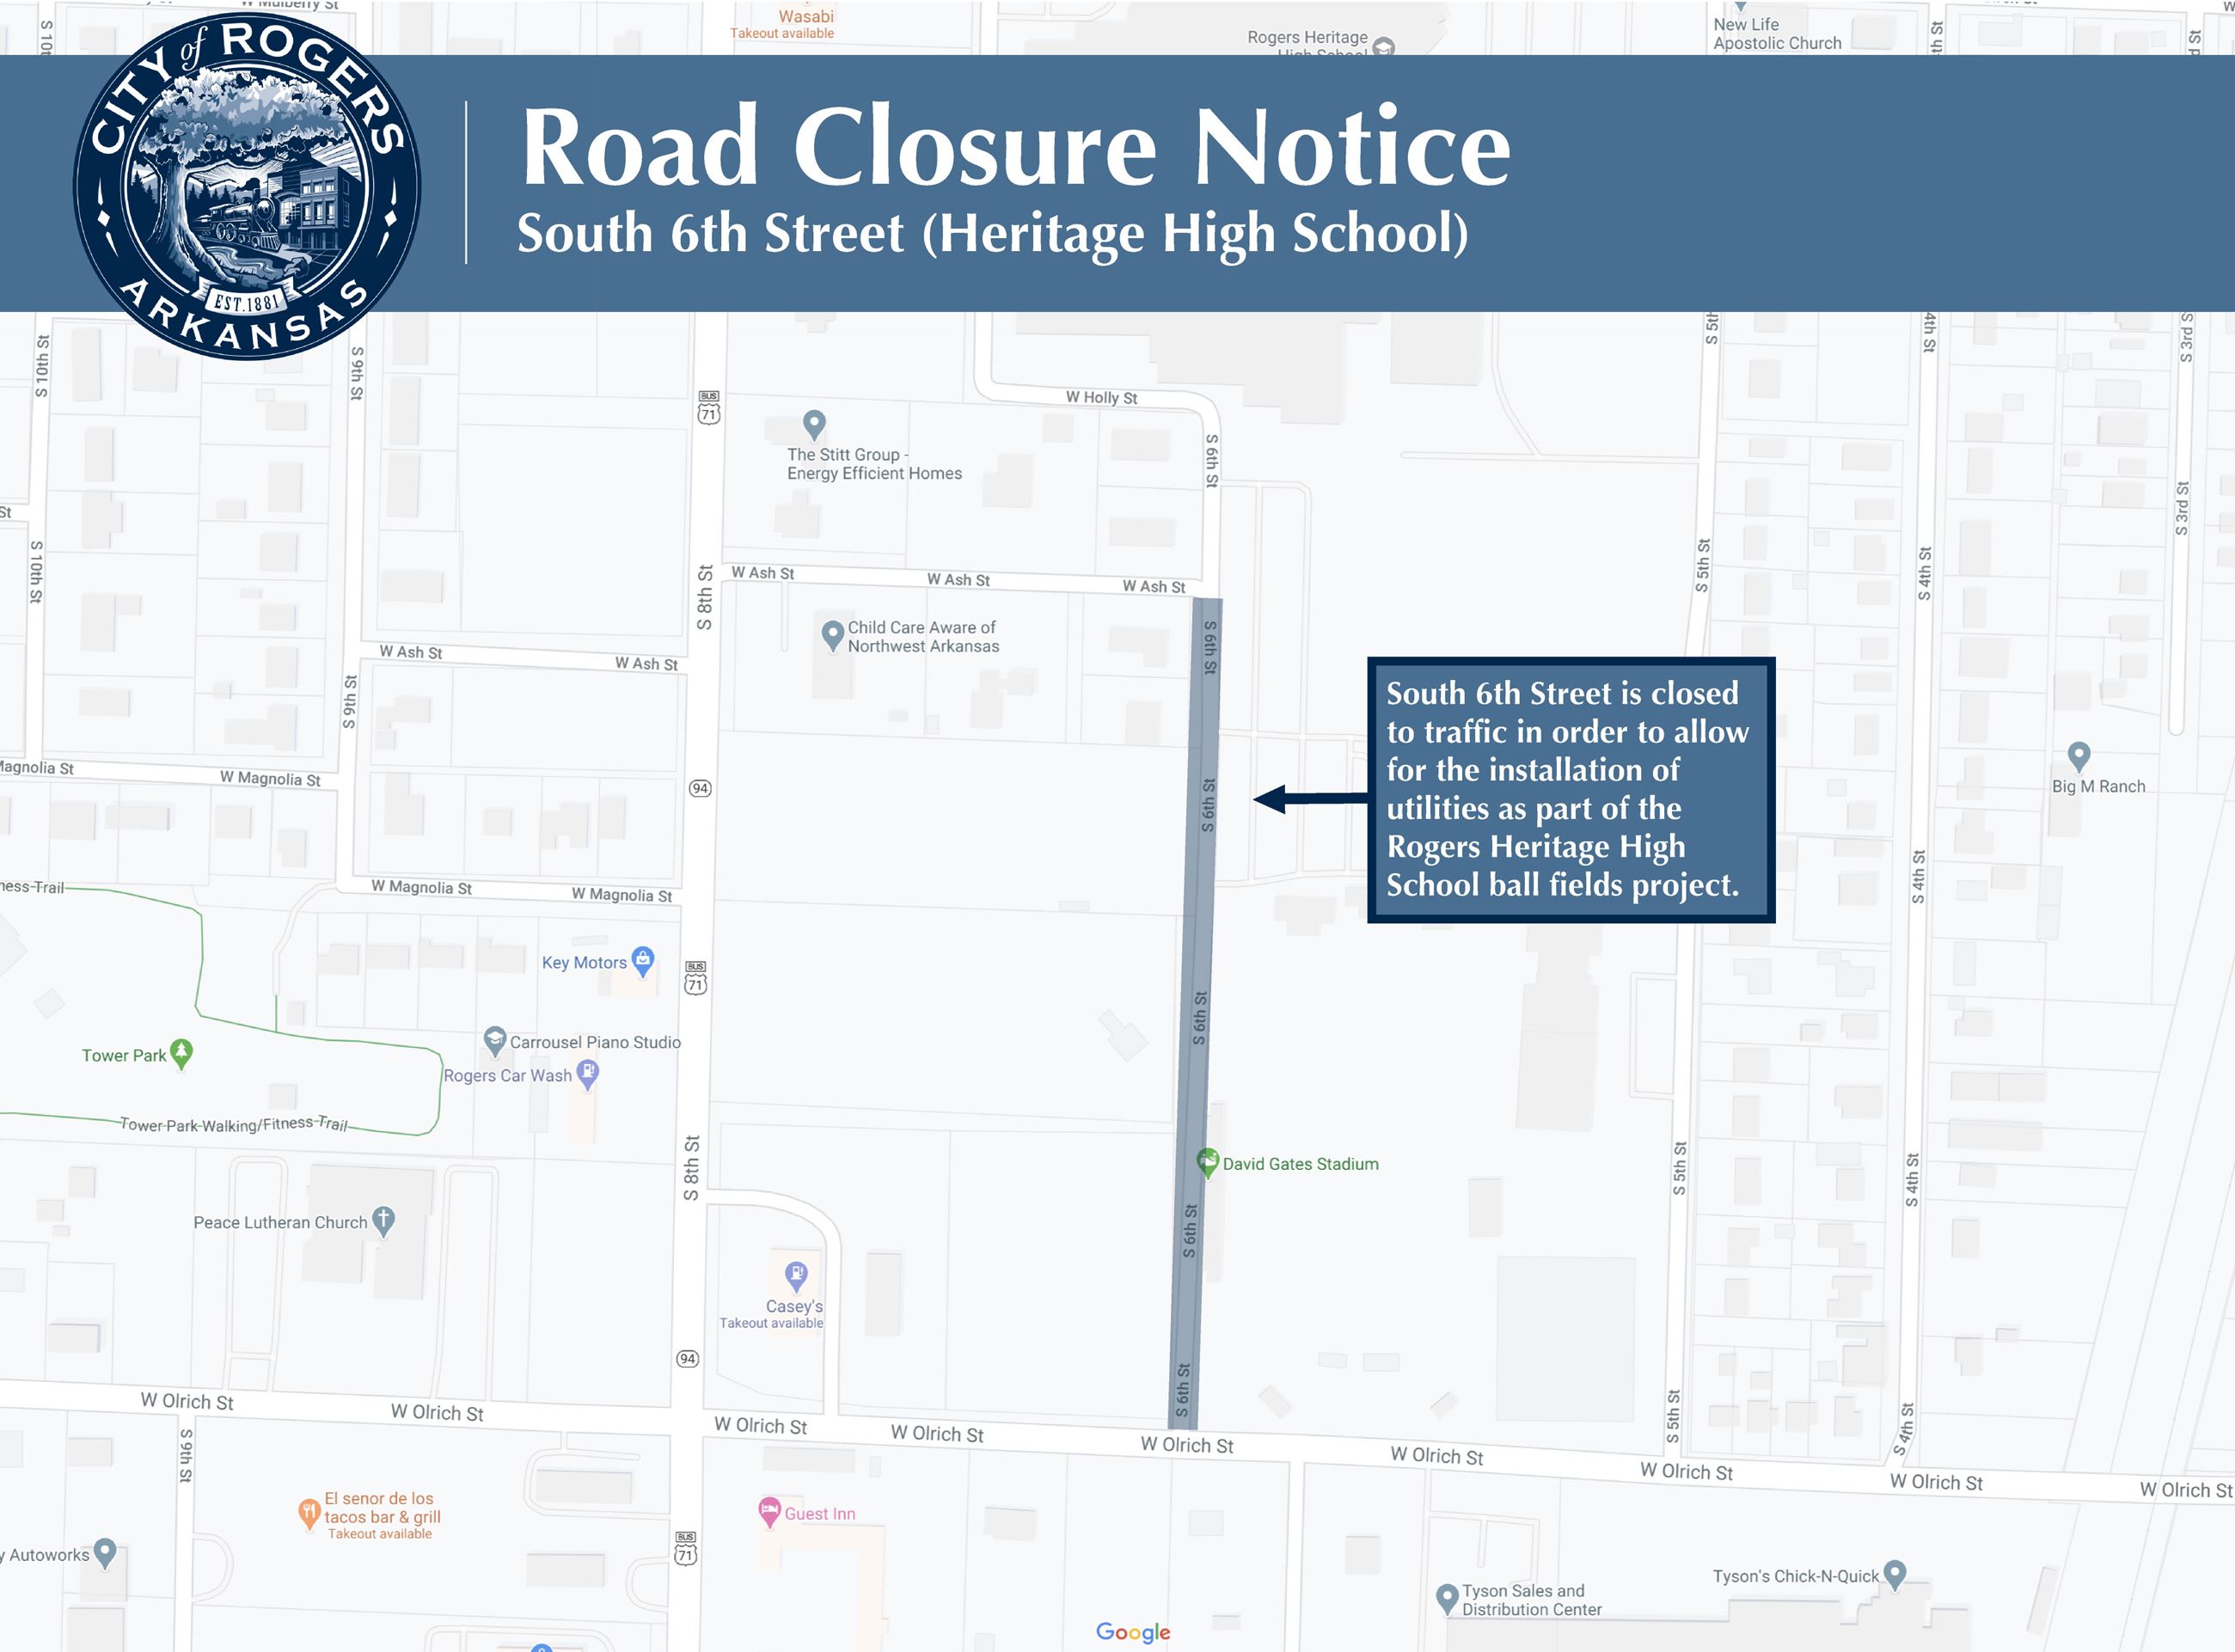 Map of South 6th Street closure